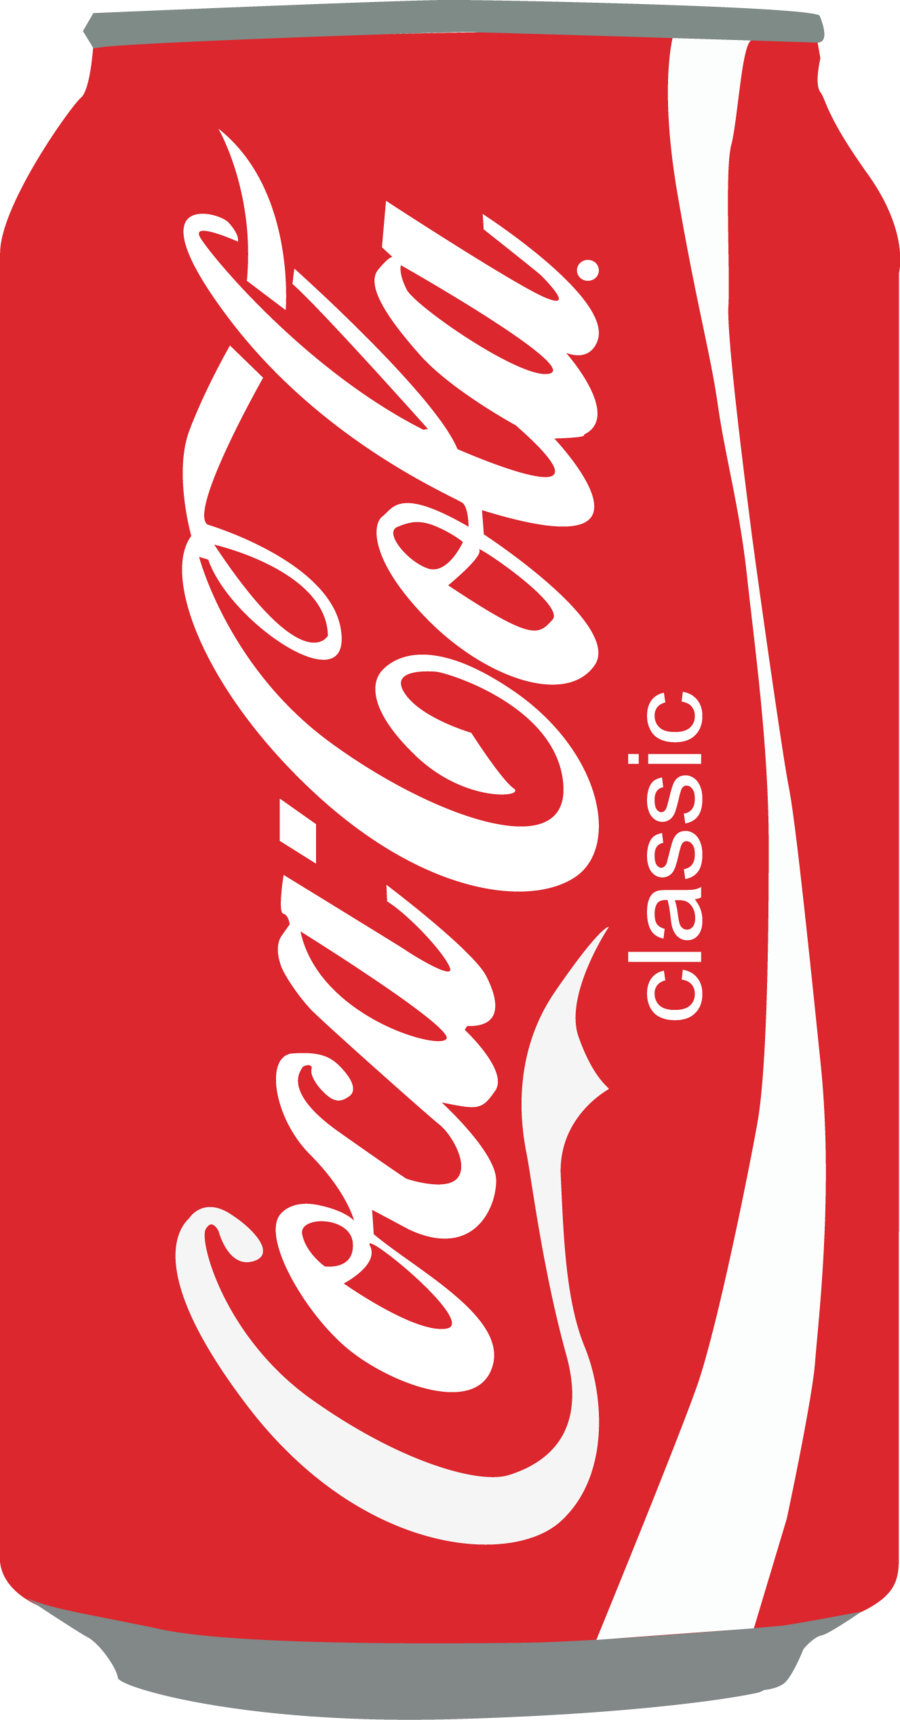 Soda Images Image Free Download Png Clipart